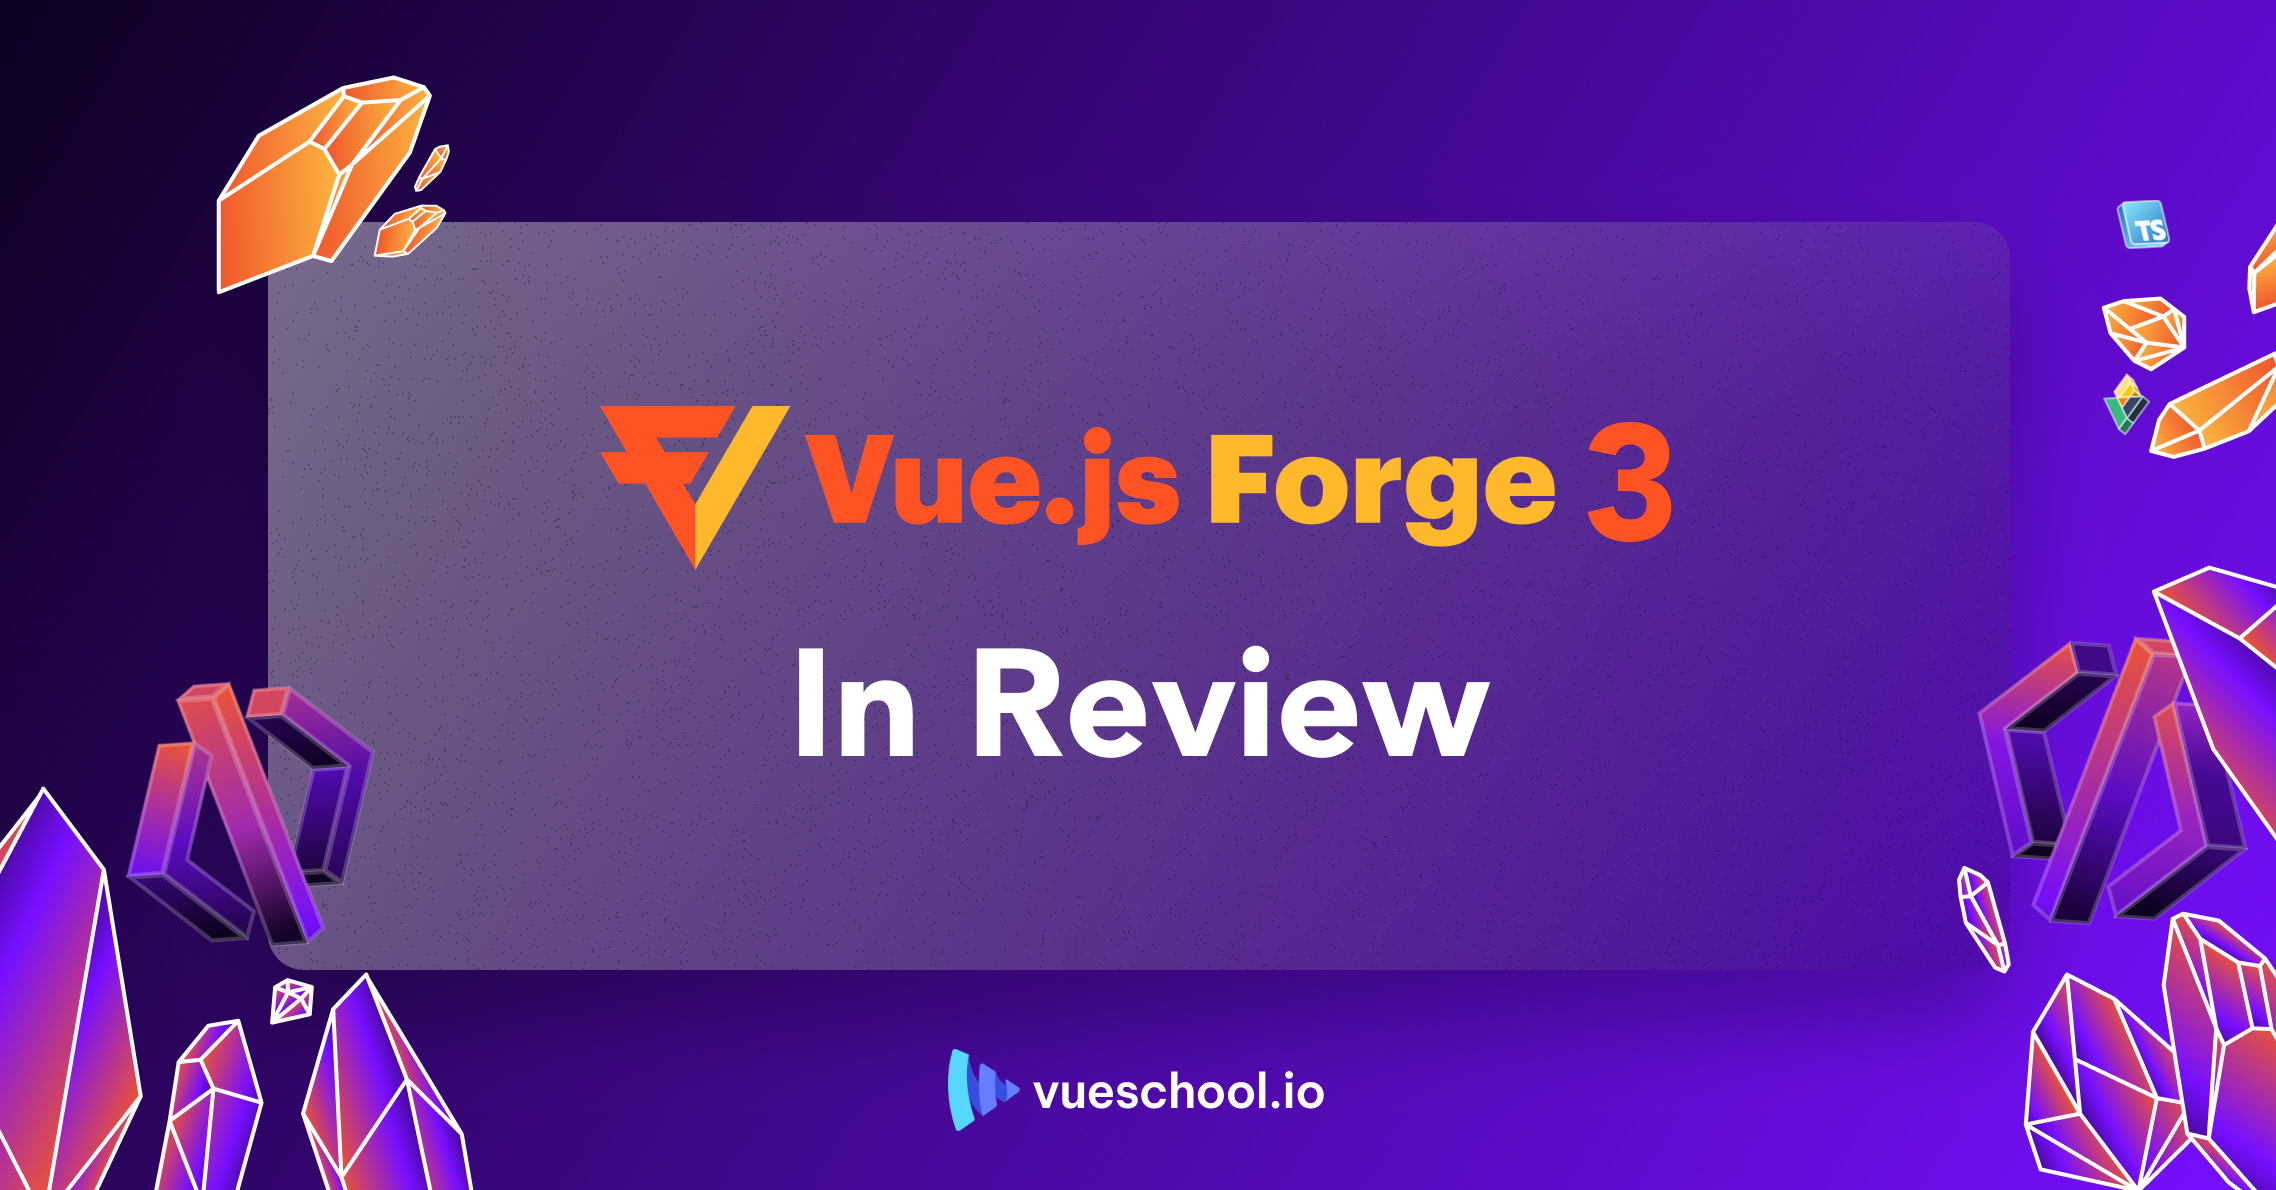 Vue.js Forge 3 in Review